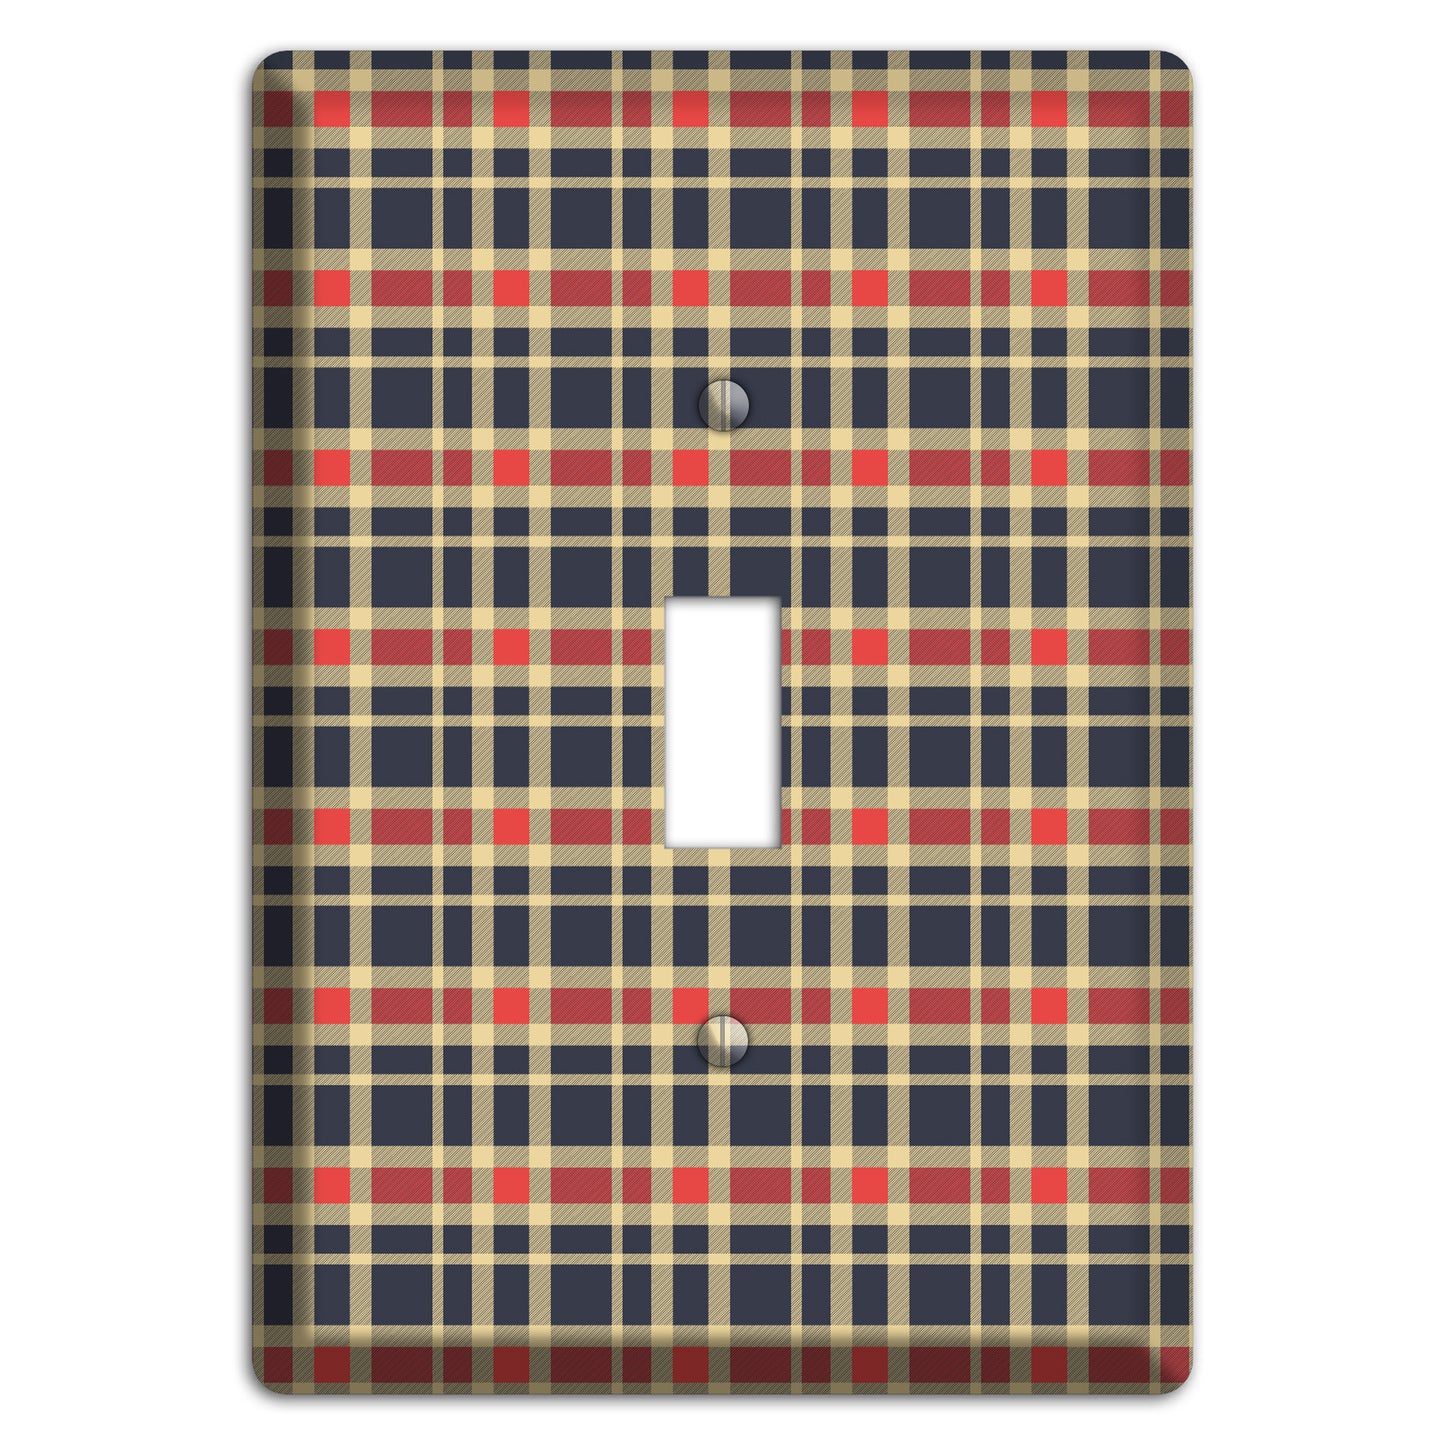 Maroon and Black Plaid 2 Cover Plates